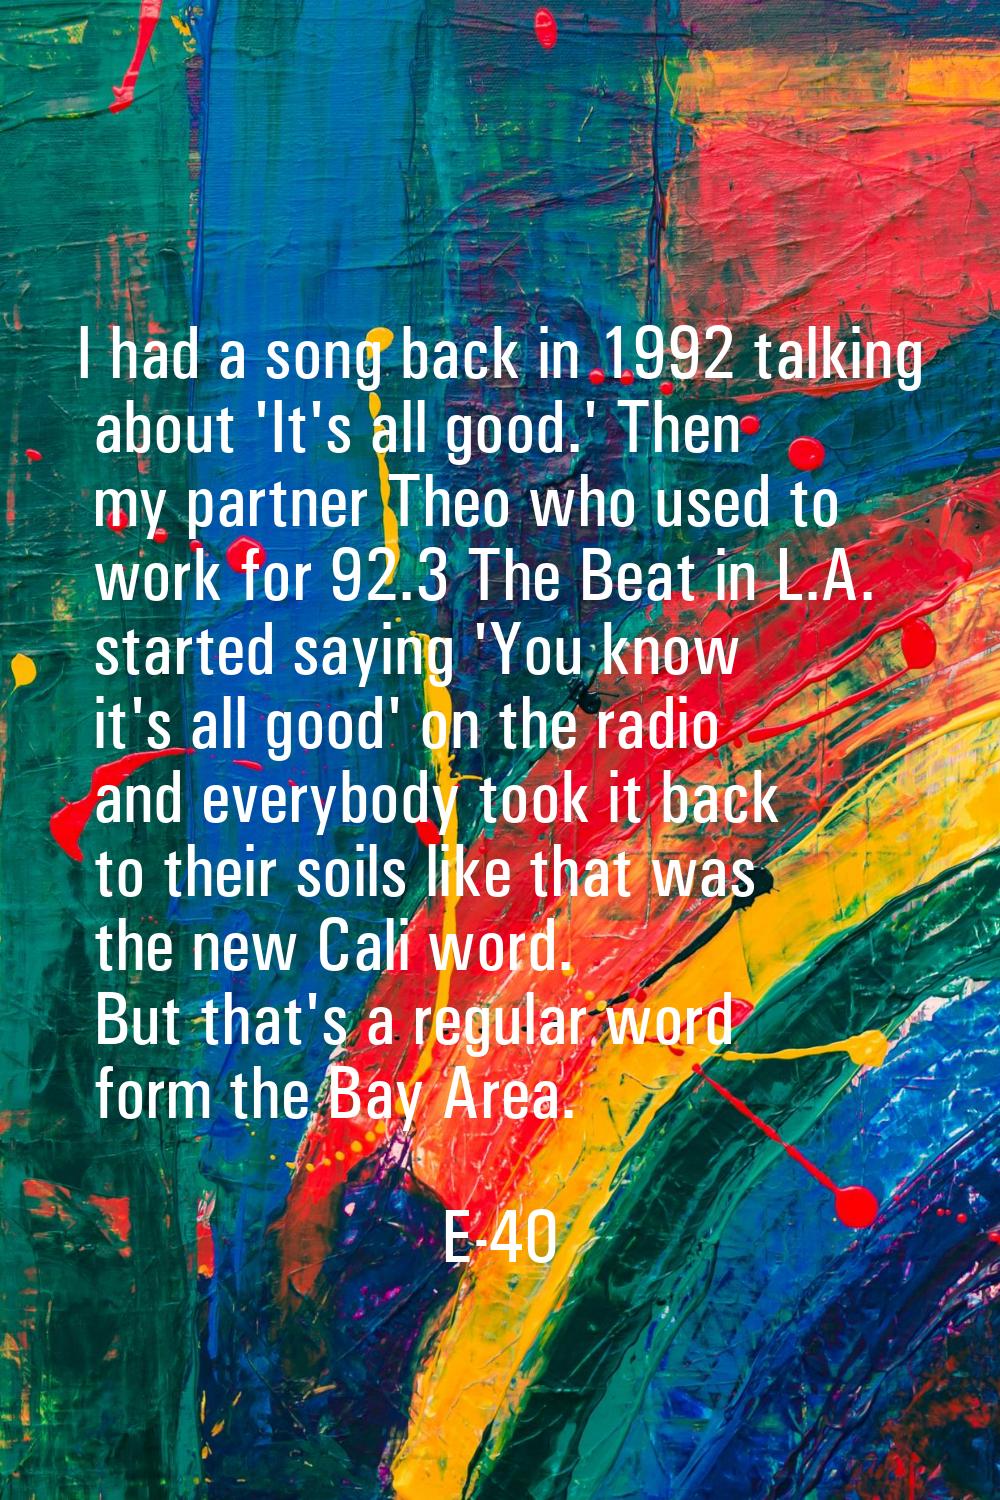 I had a song back in 1992 talking about 'It's all good.' Then my partner Theo who used to work for 